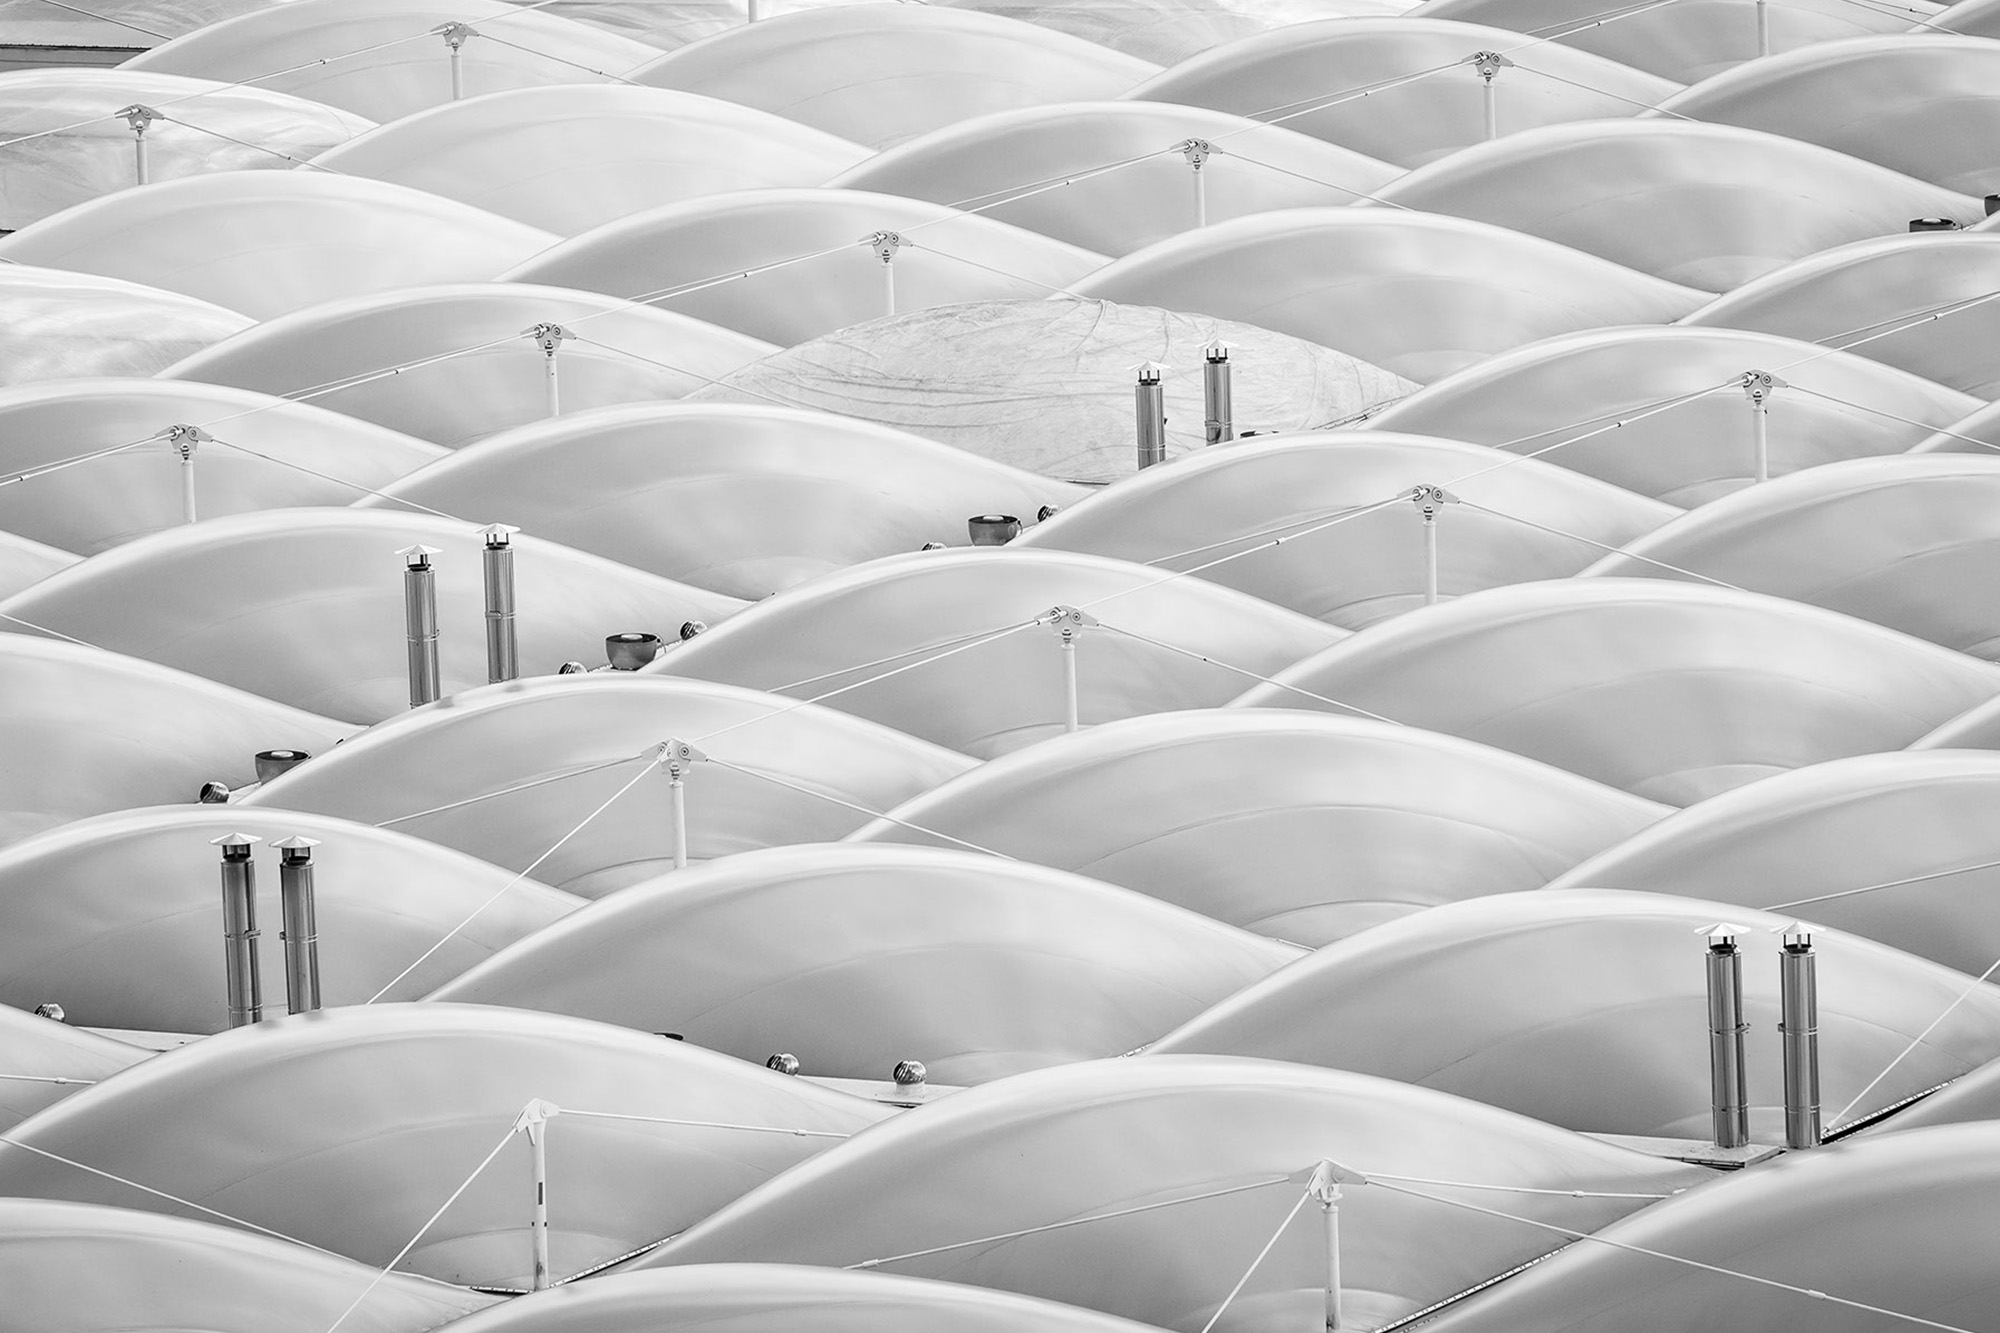 Eden Project in Cornwall etfe